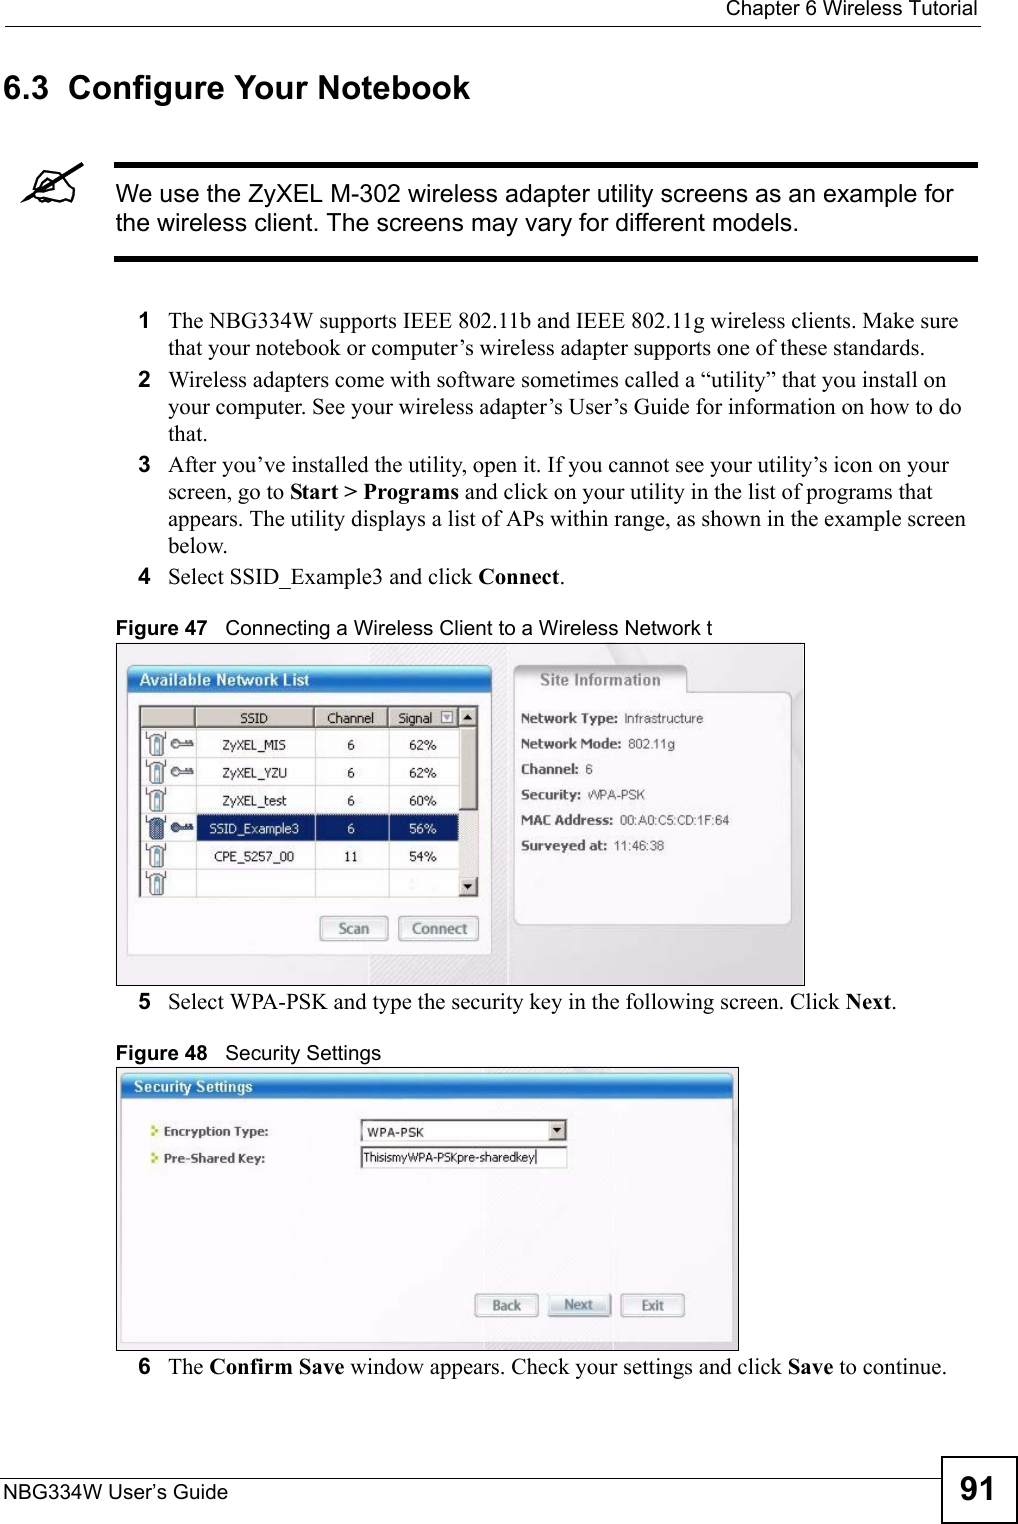  Chapter 6 Wireless TutorialNBG334W User’s Guide 916.3  Configure Your Notebook&quot;We use the ZyXEL M-302 wireless adapter utility screens as an example for the wireless client. The screens may vary for different models.1The NBG334W supports IEEE 802.11b and IEEE 802.11g wireless clients. Make sure that your notebook or computer’s wireless adapter supports one of these standards.2Wireless adapters come with software sometimes called a “utility” that you install on your computer. See your wireless adapter’s User’s Guide for information on how to do that.3After you’ve installed the utility, open it. If you cannot see your utility’s icon on your screen, go to Start &gt; Programs and click on your utility in the list of programs that appears. The utility displays a list of APs within range, as shown in the example screen below.4Select SSID_Example3 and click Connect. Figure 47   Connecting a Wireless Client to a Wireless Network t5Select WPA-PSK and type the security key in the following screen. Click Next.Figure 48   Security Settings 6The Confirm Save window appears. Check your settings and click Save to continue.